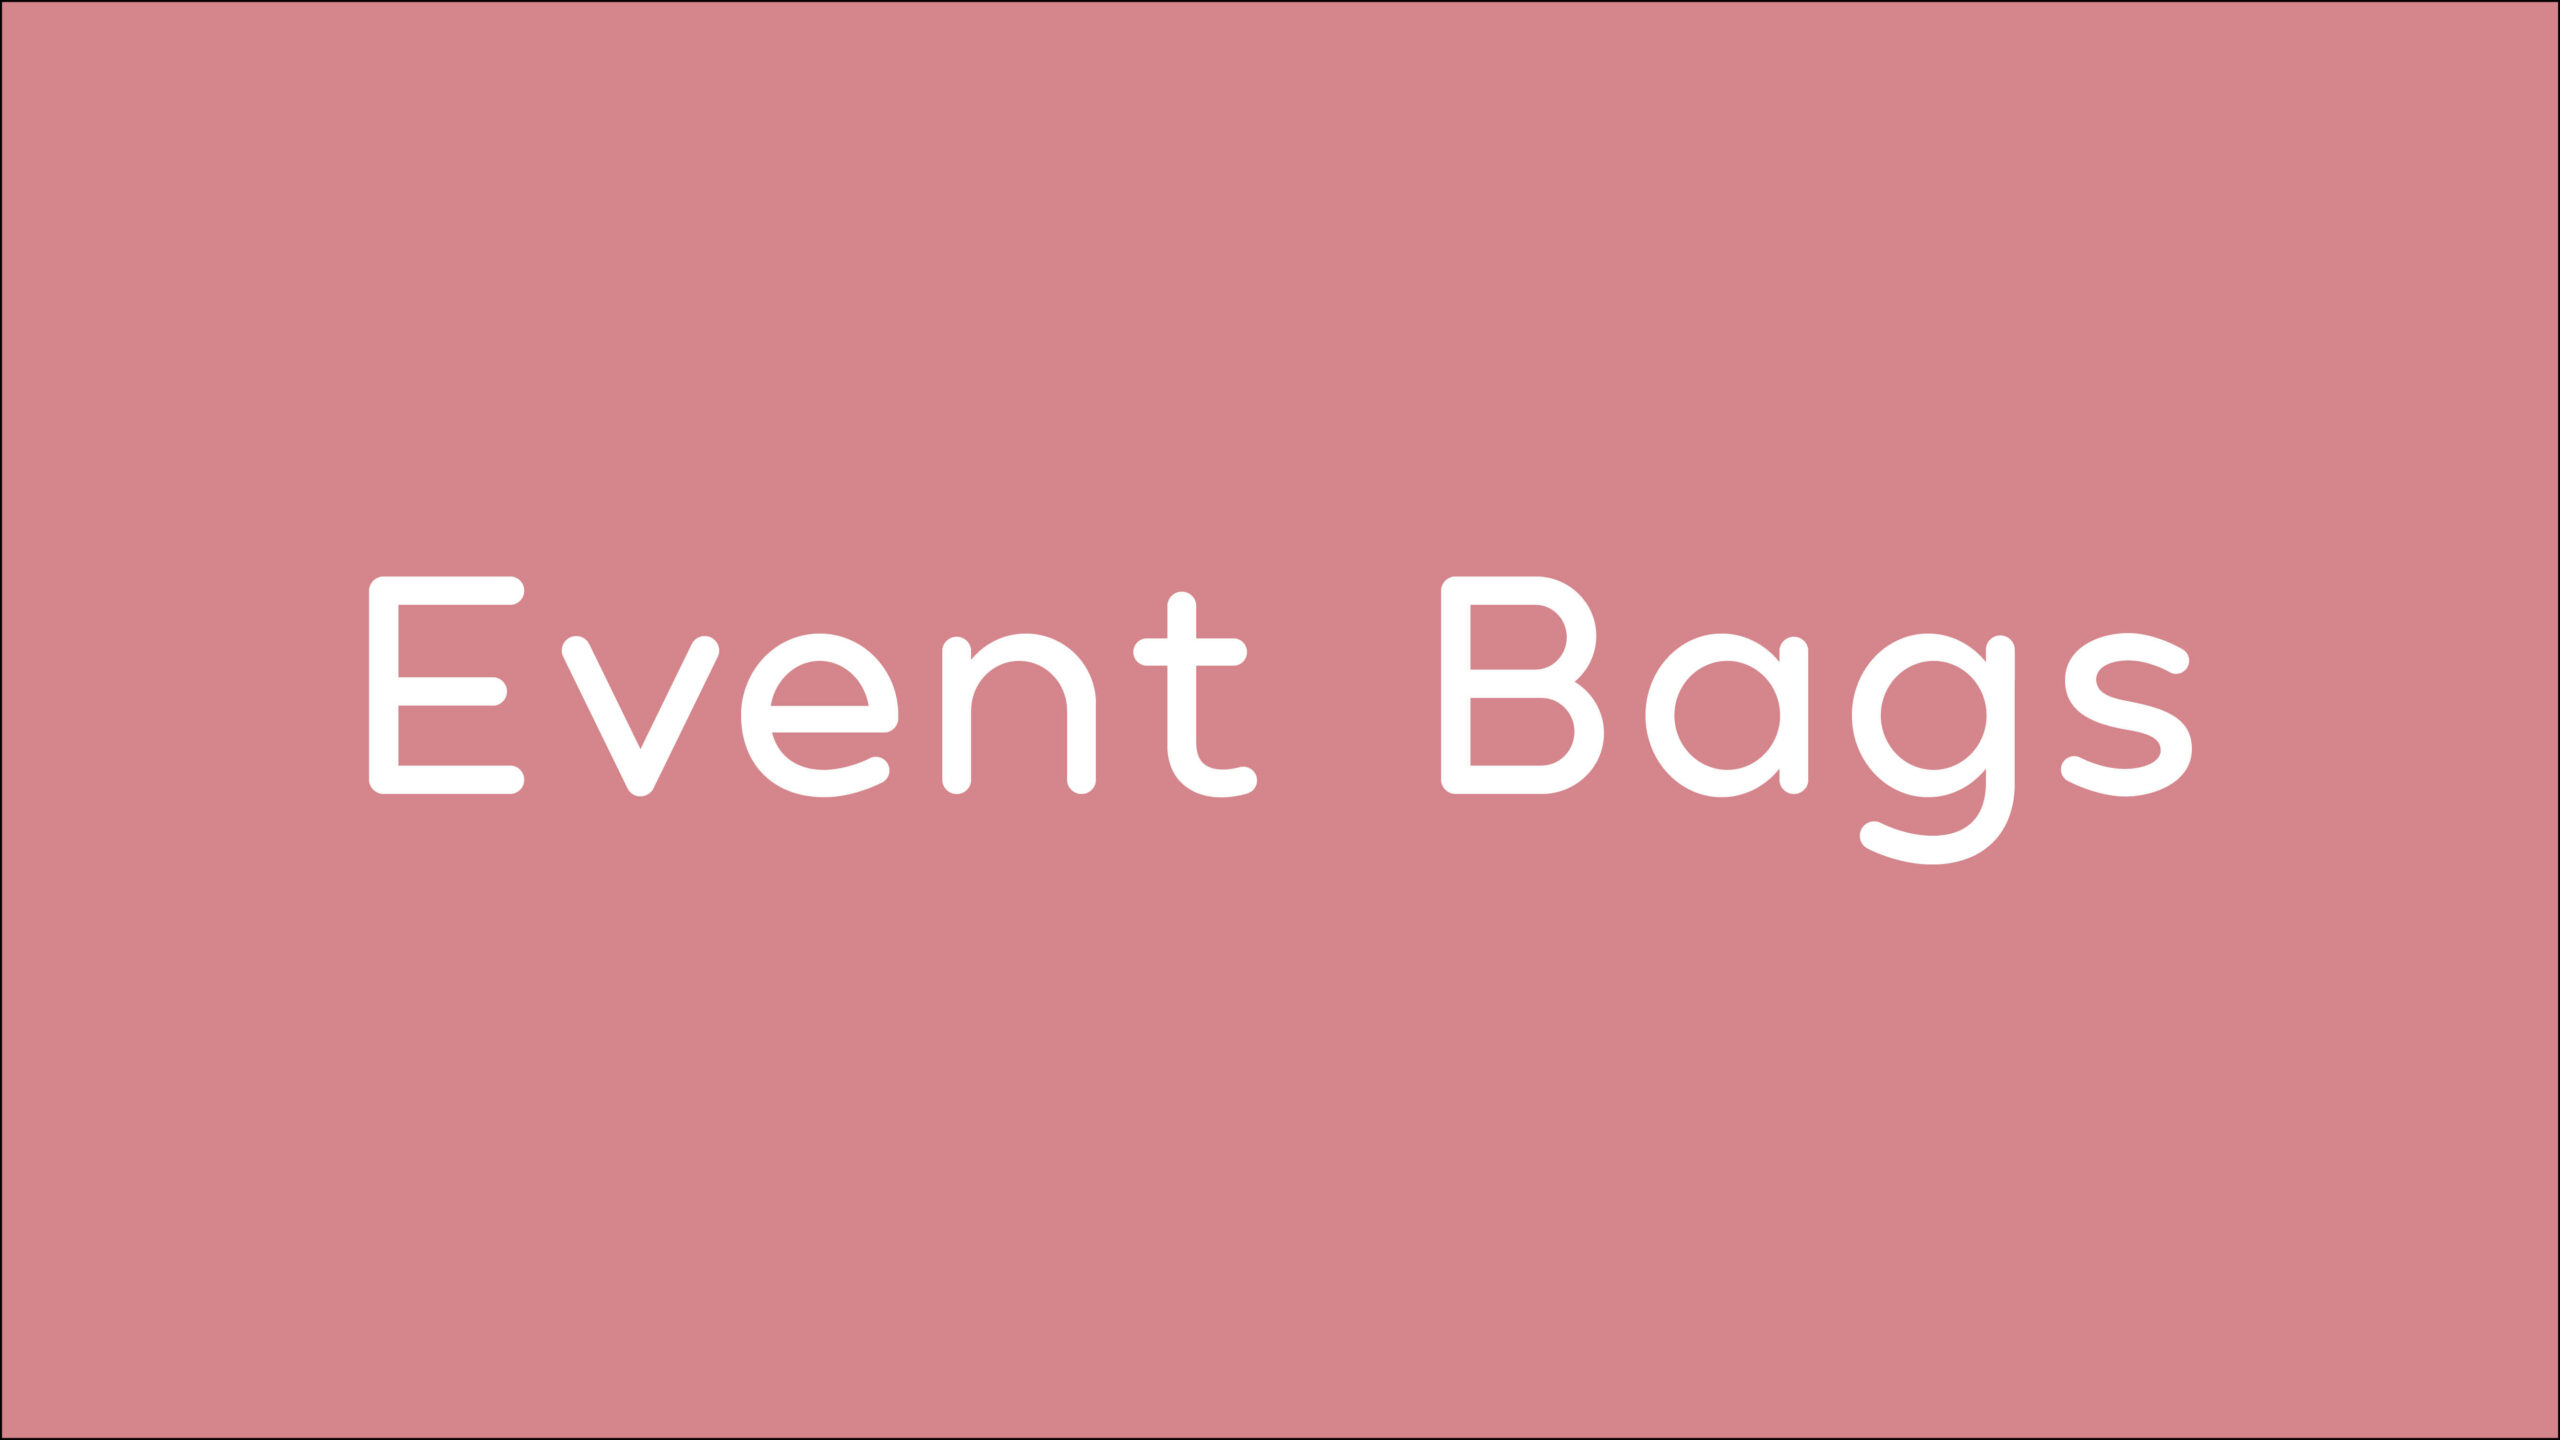 Event Bags Welcome Kit Graphic